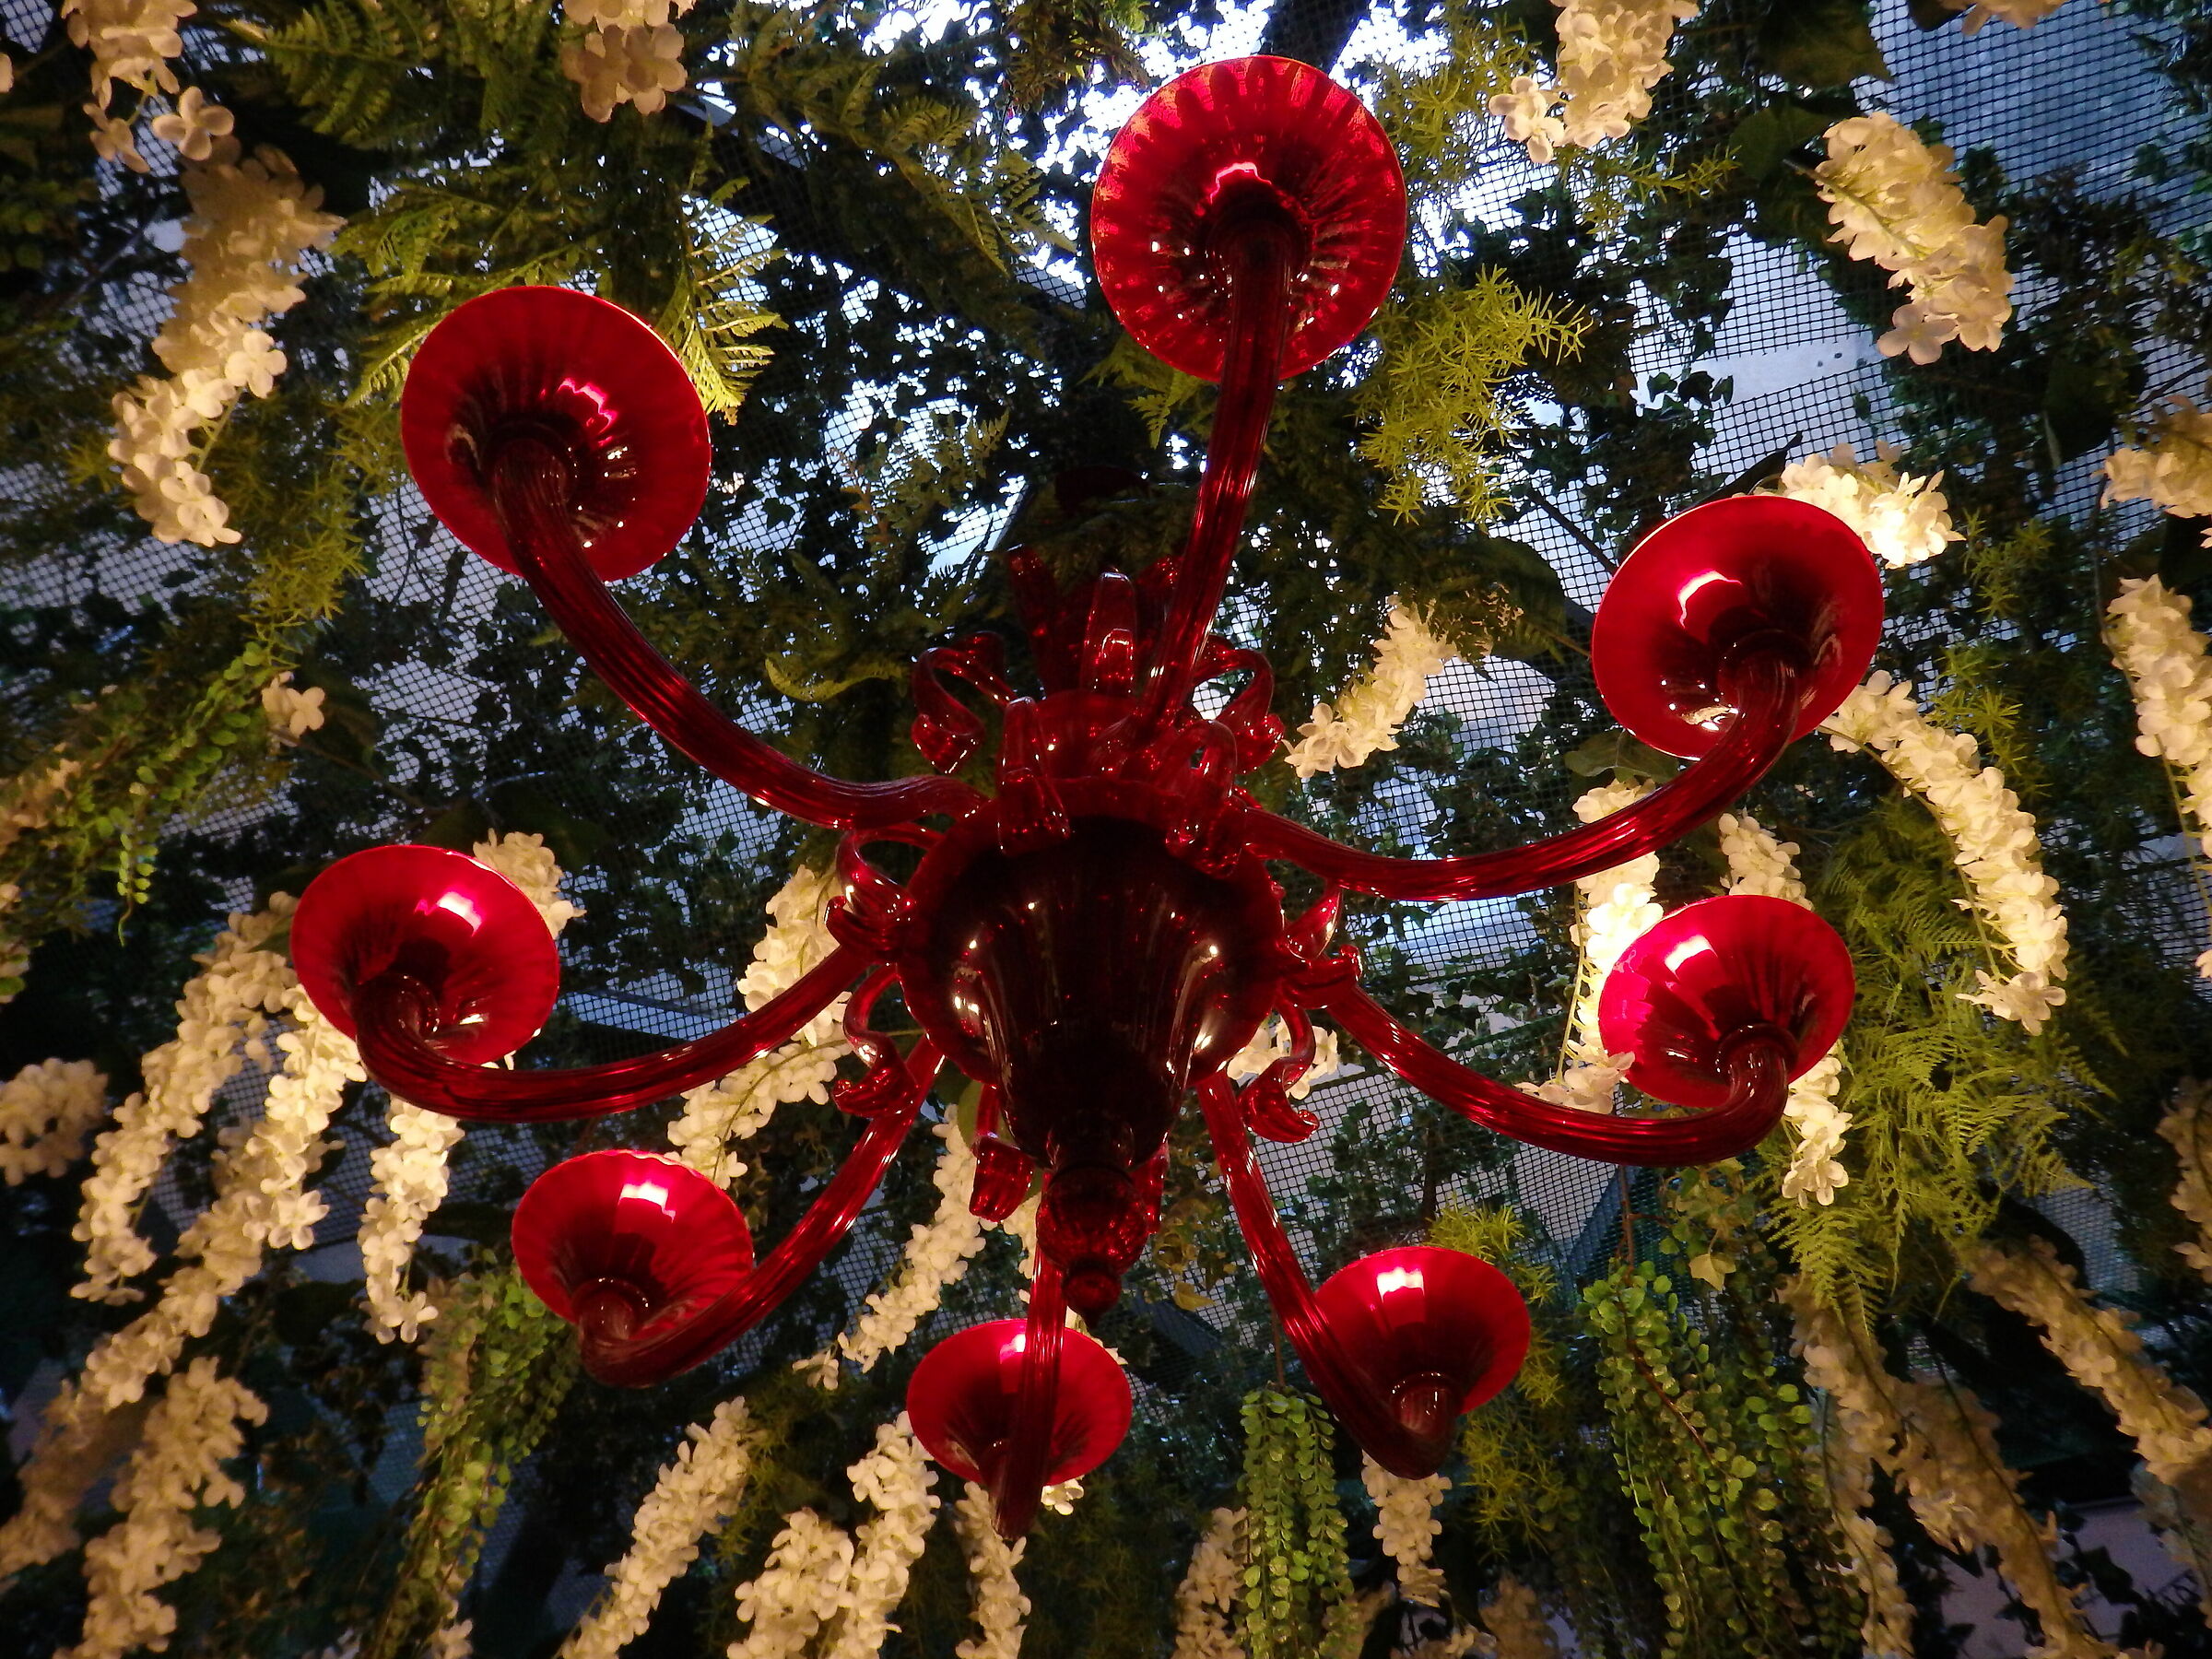 The Red Chandelier...